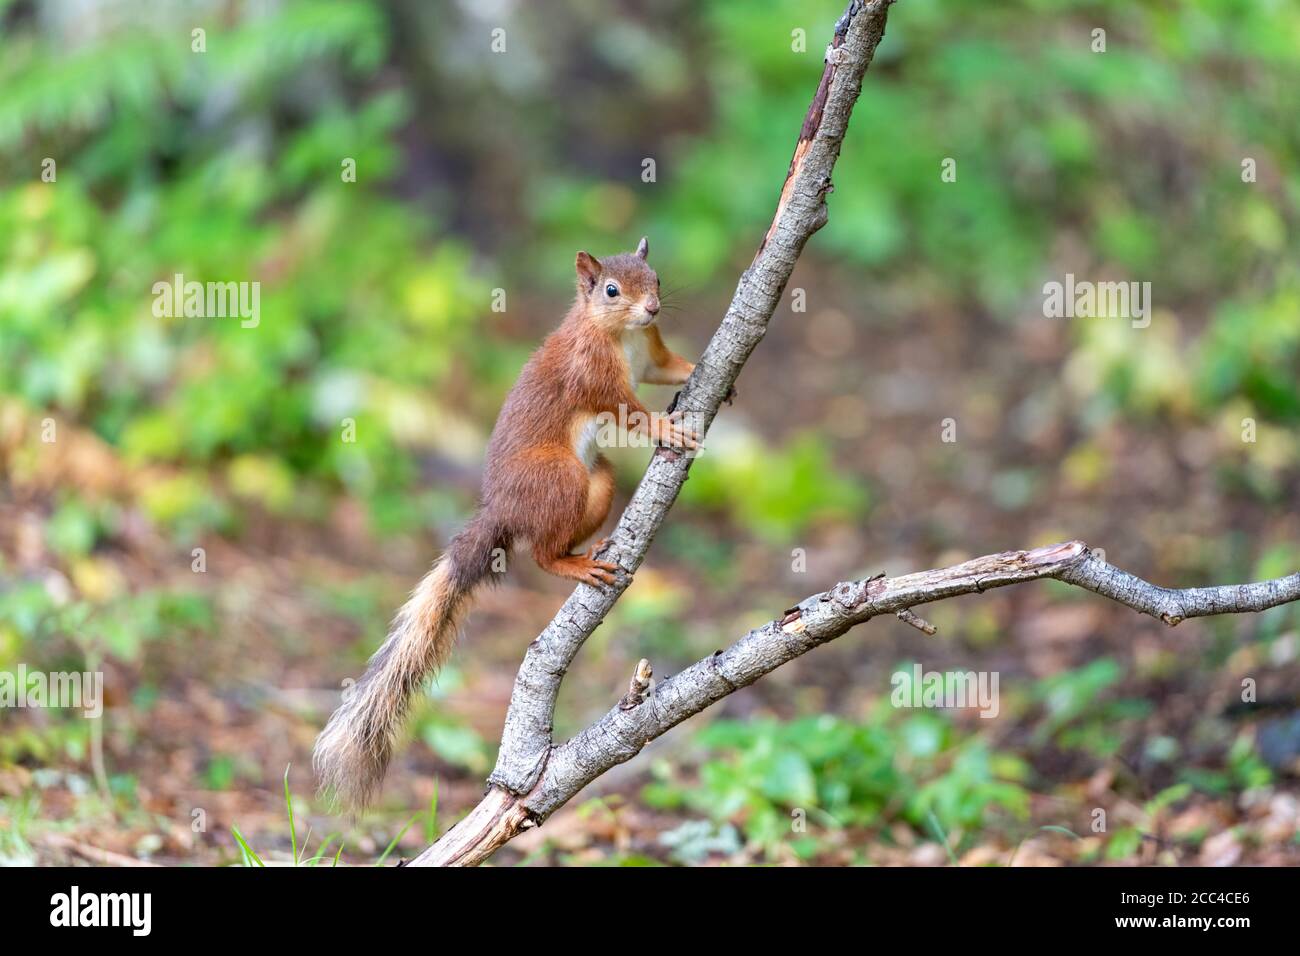 Red squirrel (Scuirus vulgaris) clinging to fallen tree branch Stock Photo